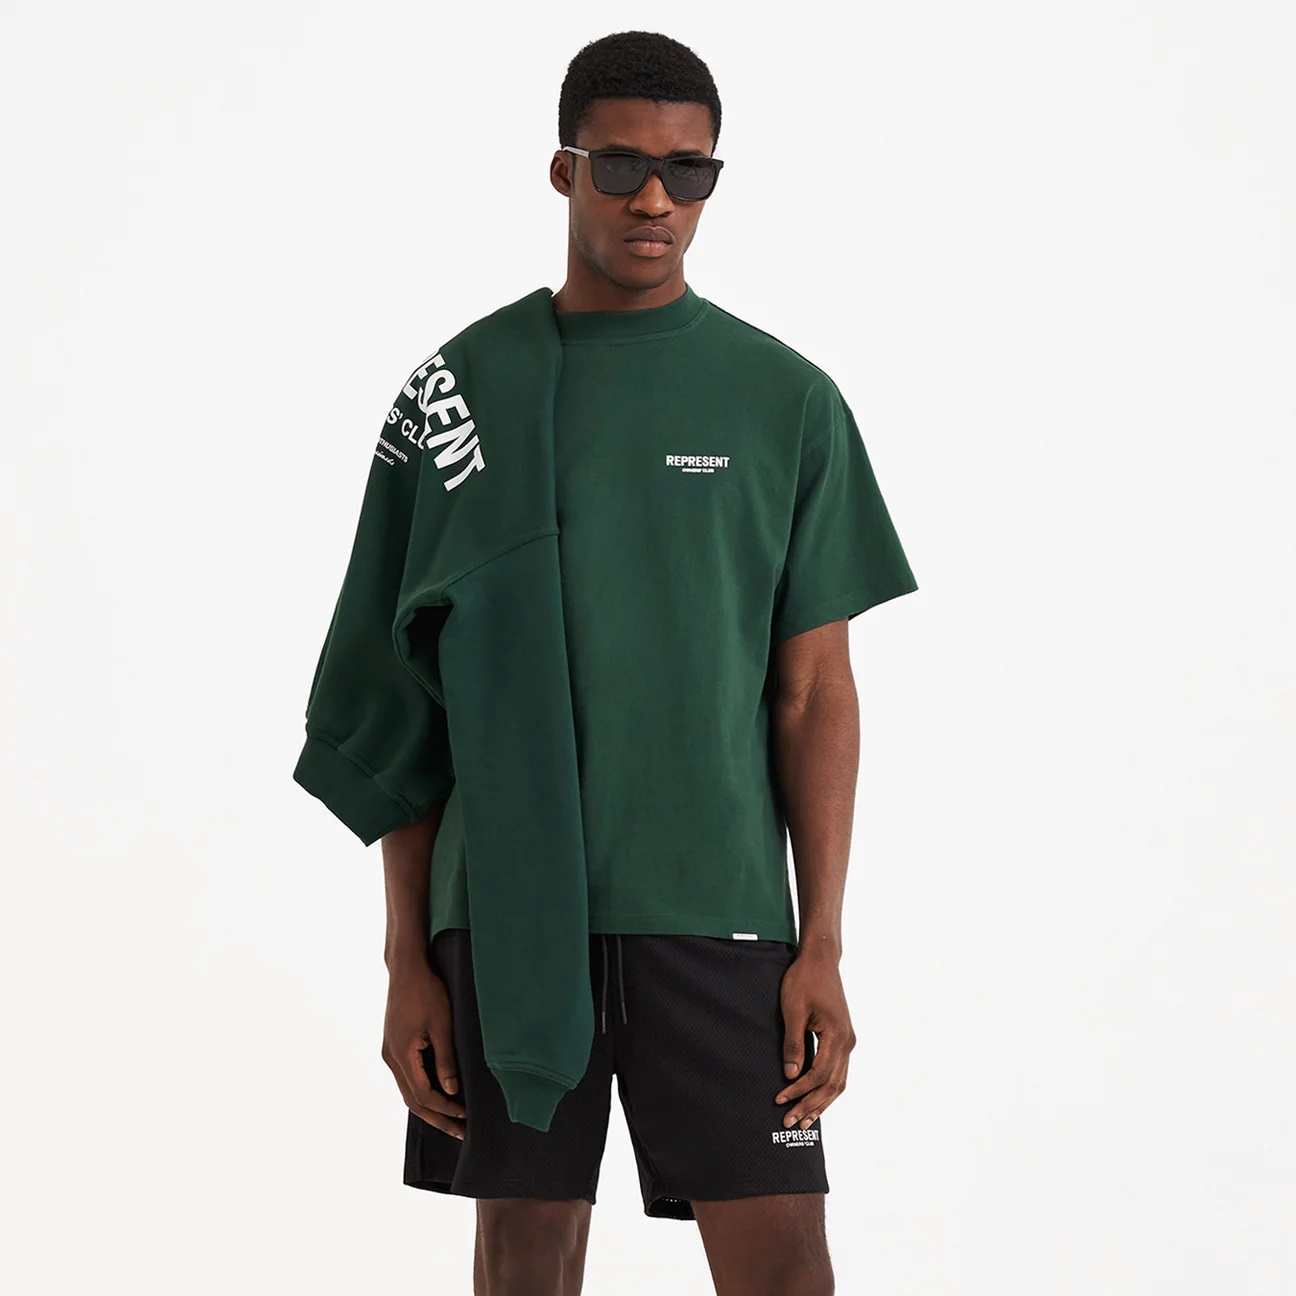 REPRESENT Owners Club T-Shirt in Racing Green XL